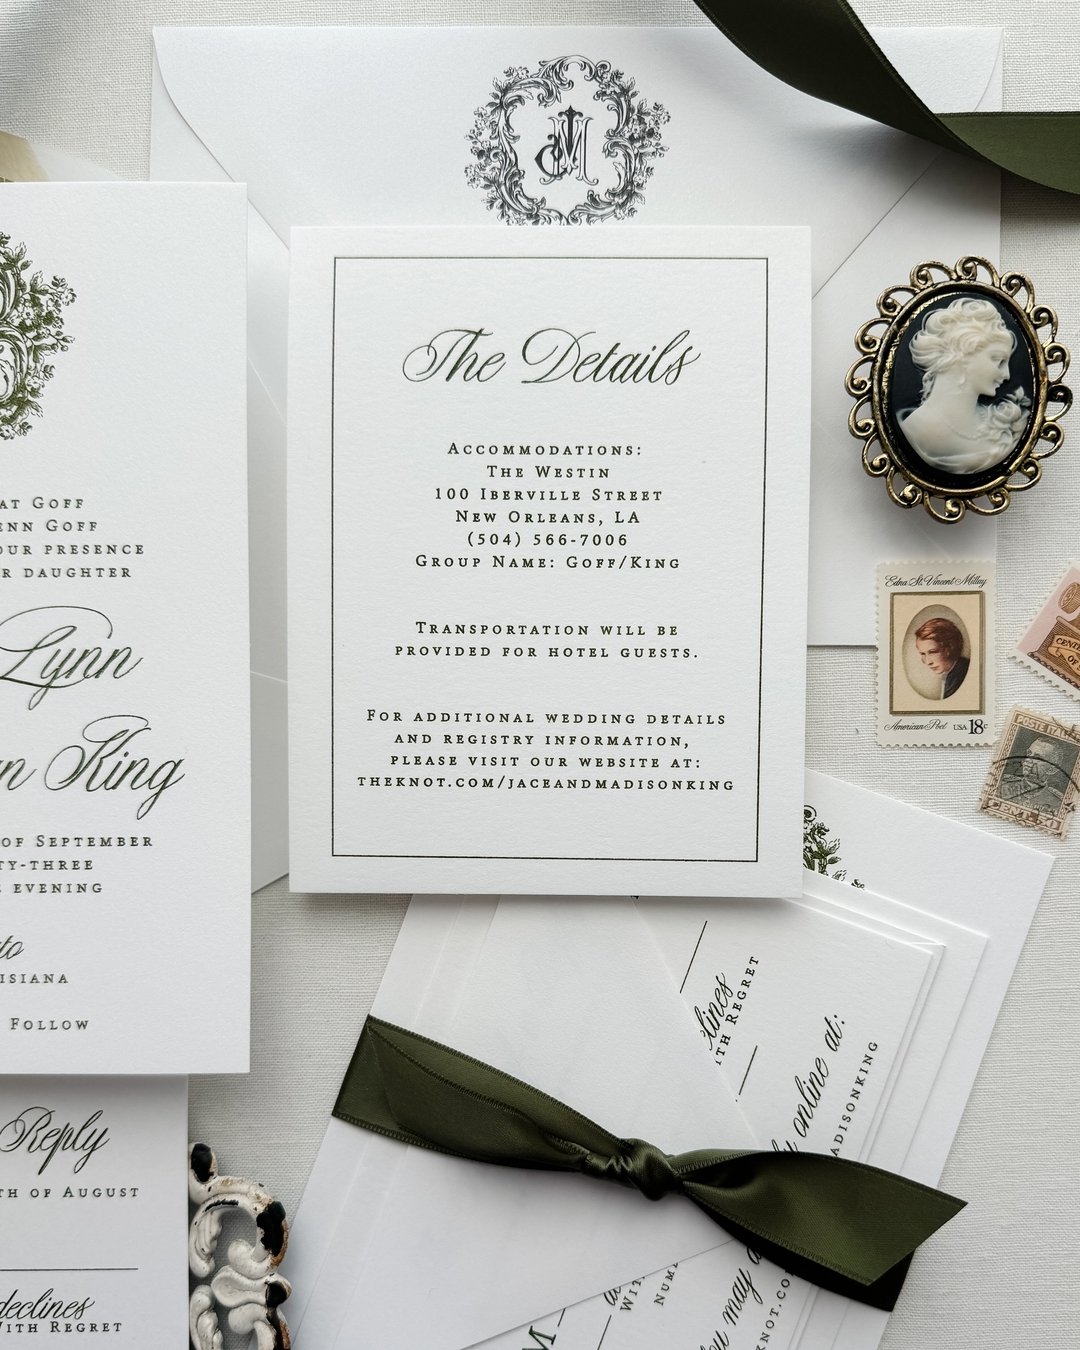 Your wedding day is filled with so many memorable moments and events. From the ceremony to cocktail hour to the reception, you want to ensure your guests know exactly what to expect and when. That's where the details card in your wedding stationery s